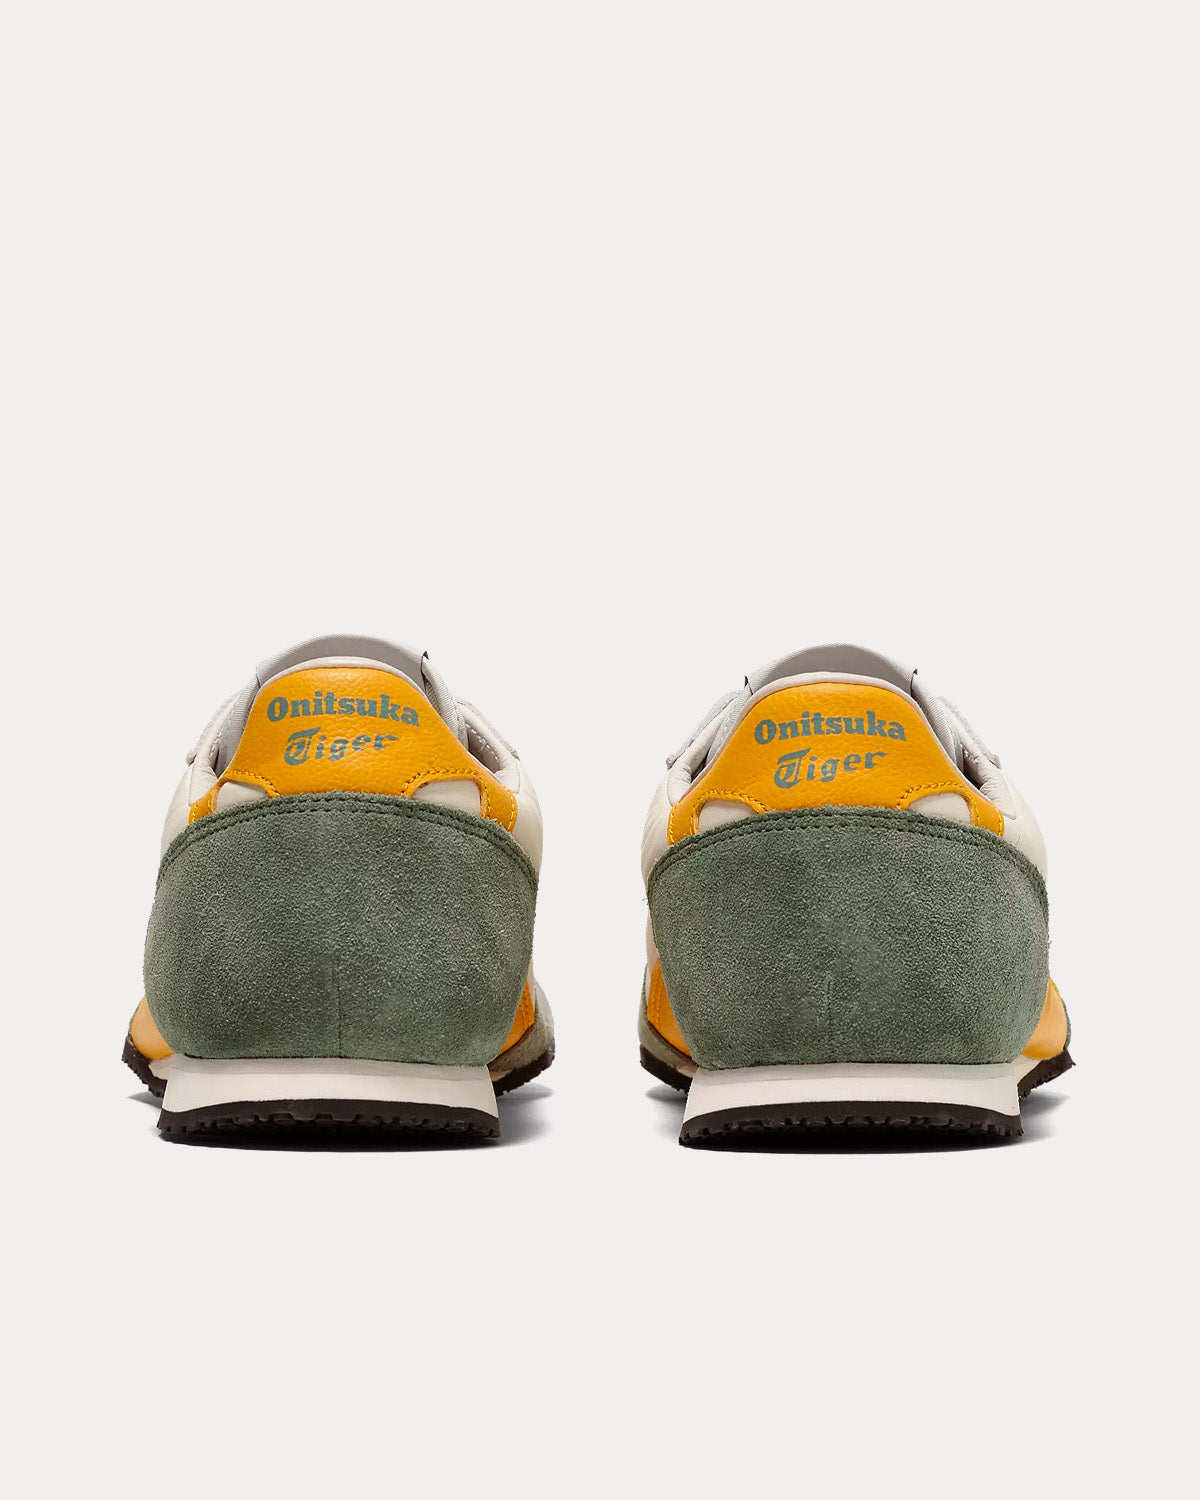 Onitsuka Tiger - Serrano CL Birch / Tiger Yellow Low Top Sneakers